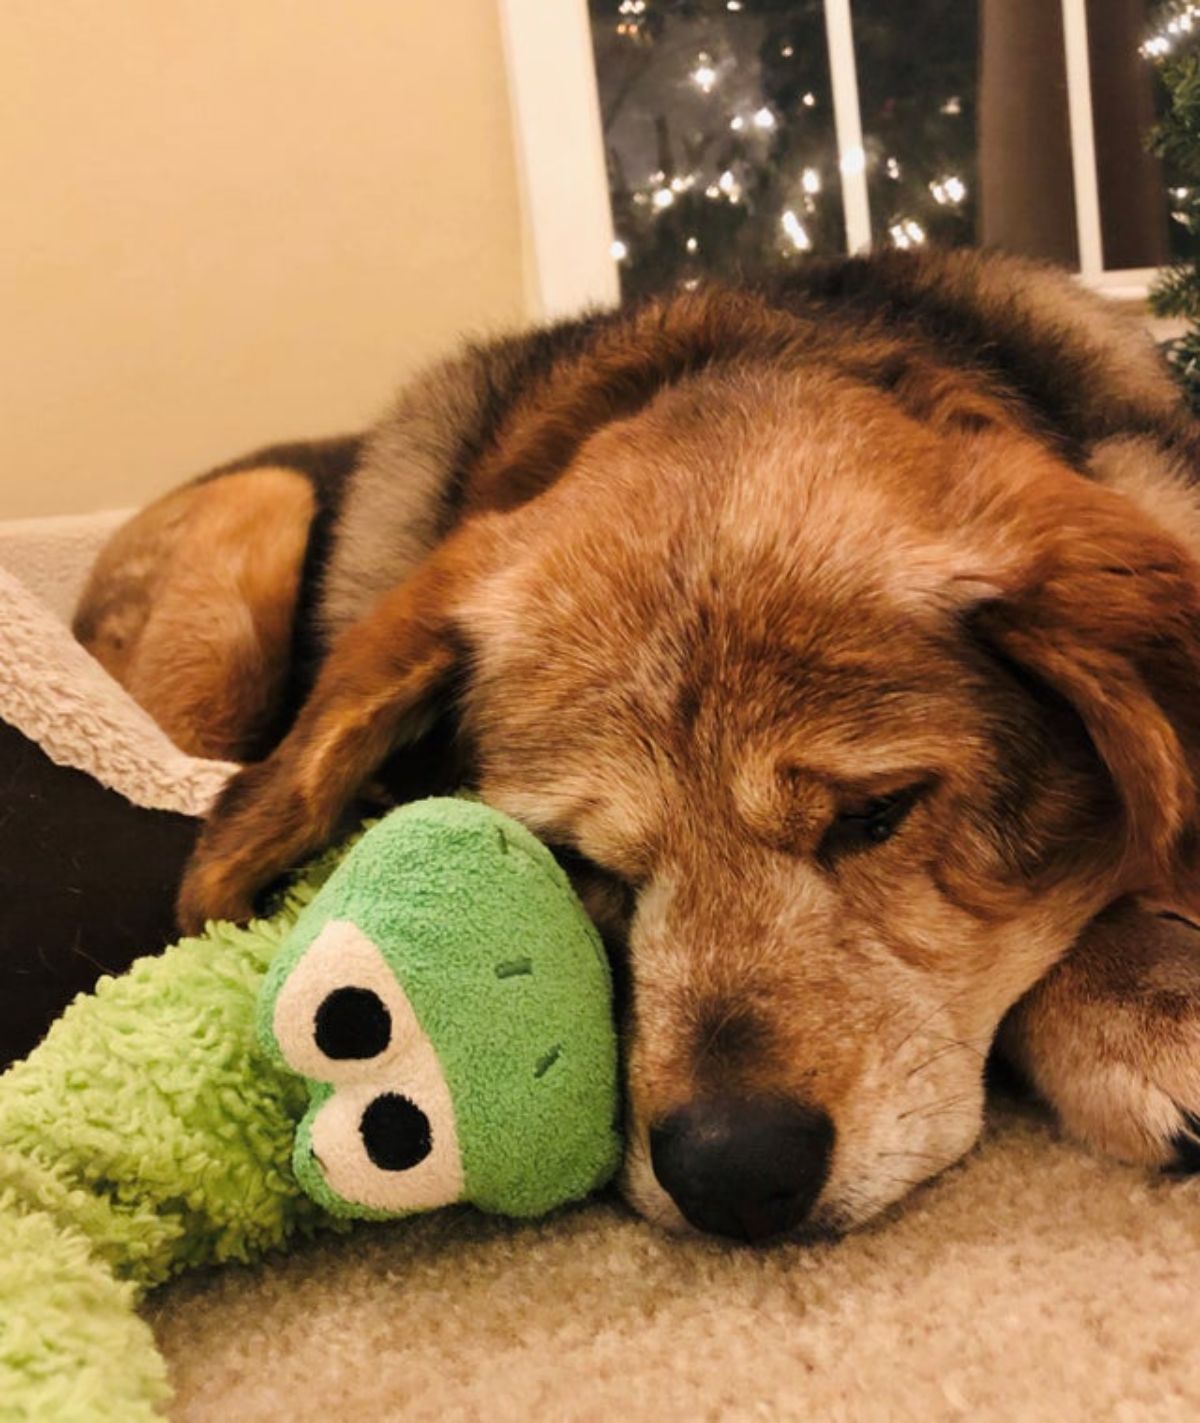 old brown dog sleeping on the floor with a stuffed green toy by the face